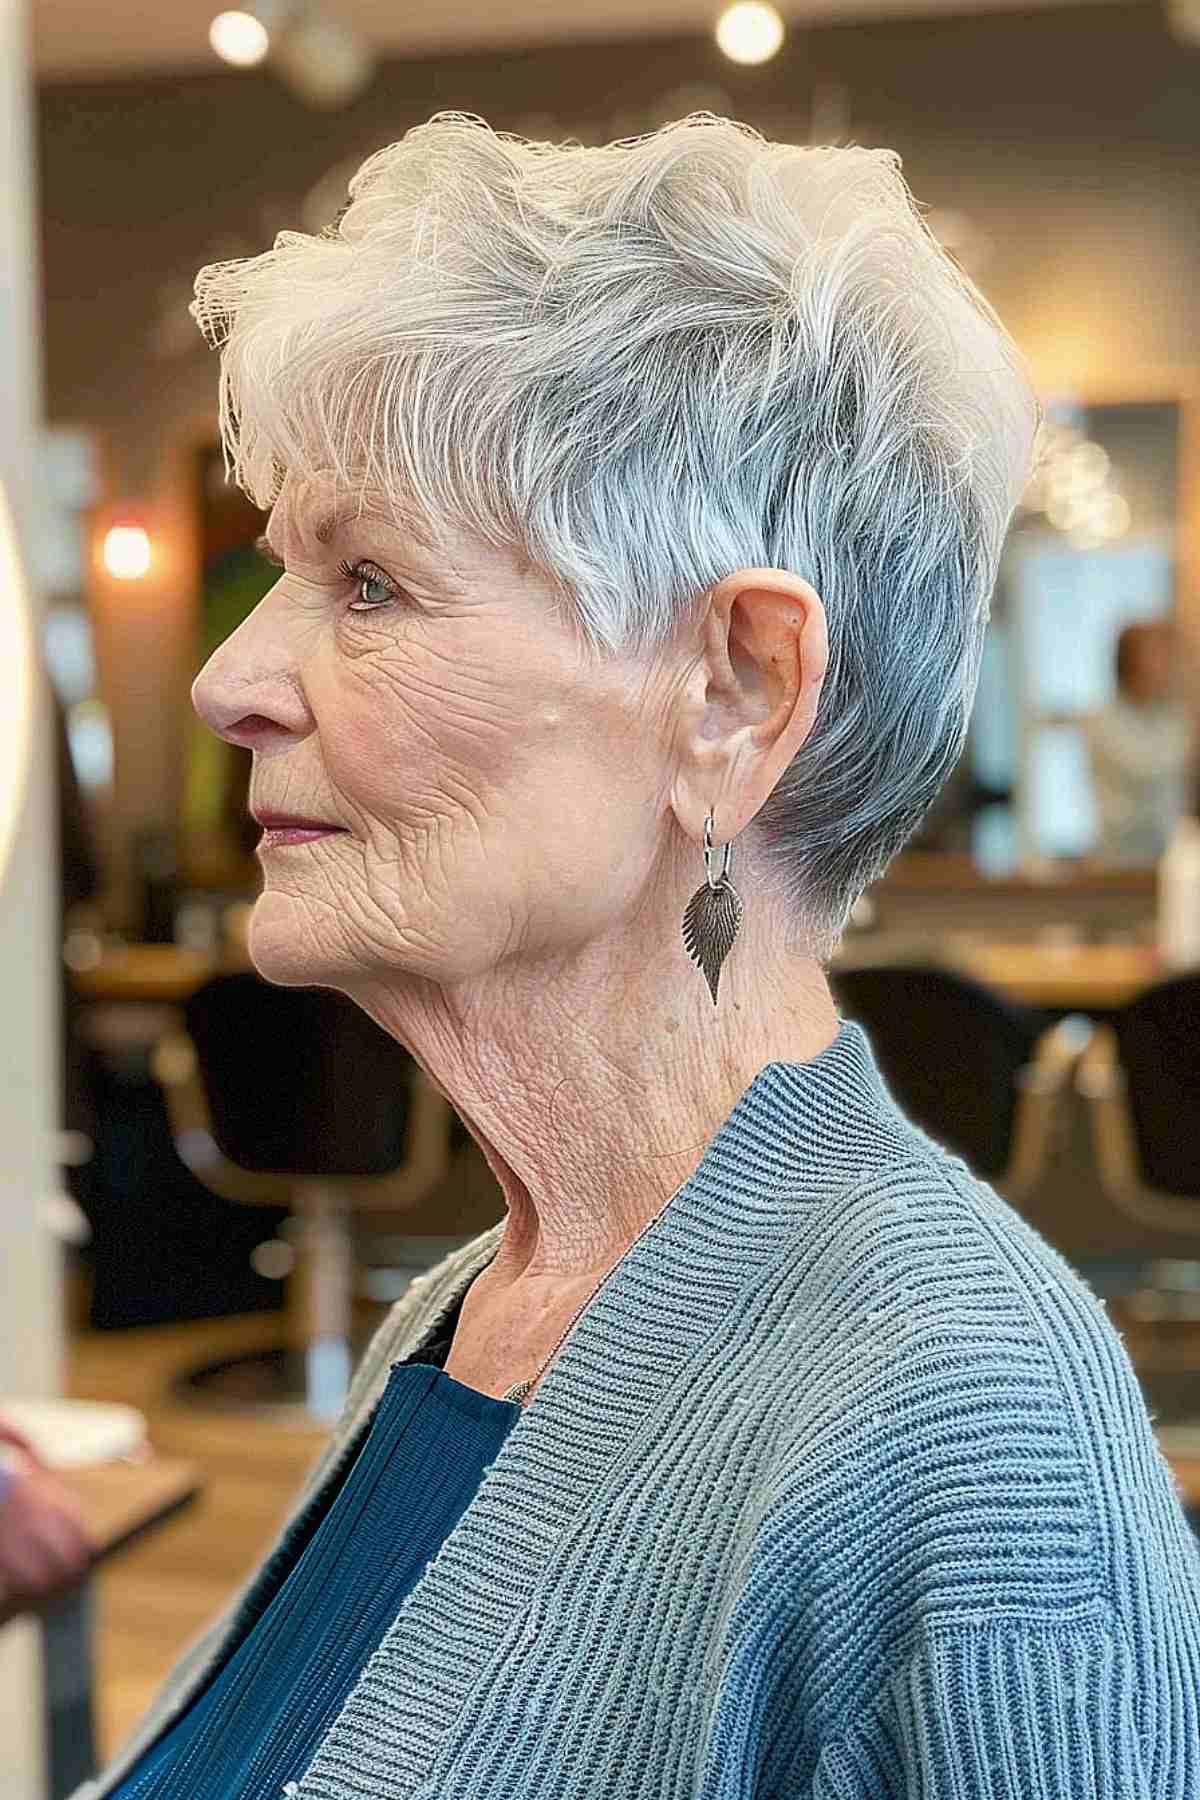 Edgy androgynous pixie with textured layers for women over 70, easy to style and adds volume to fine hair.